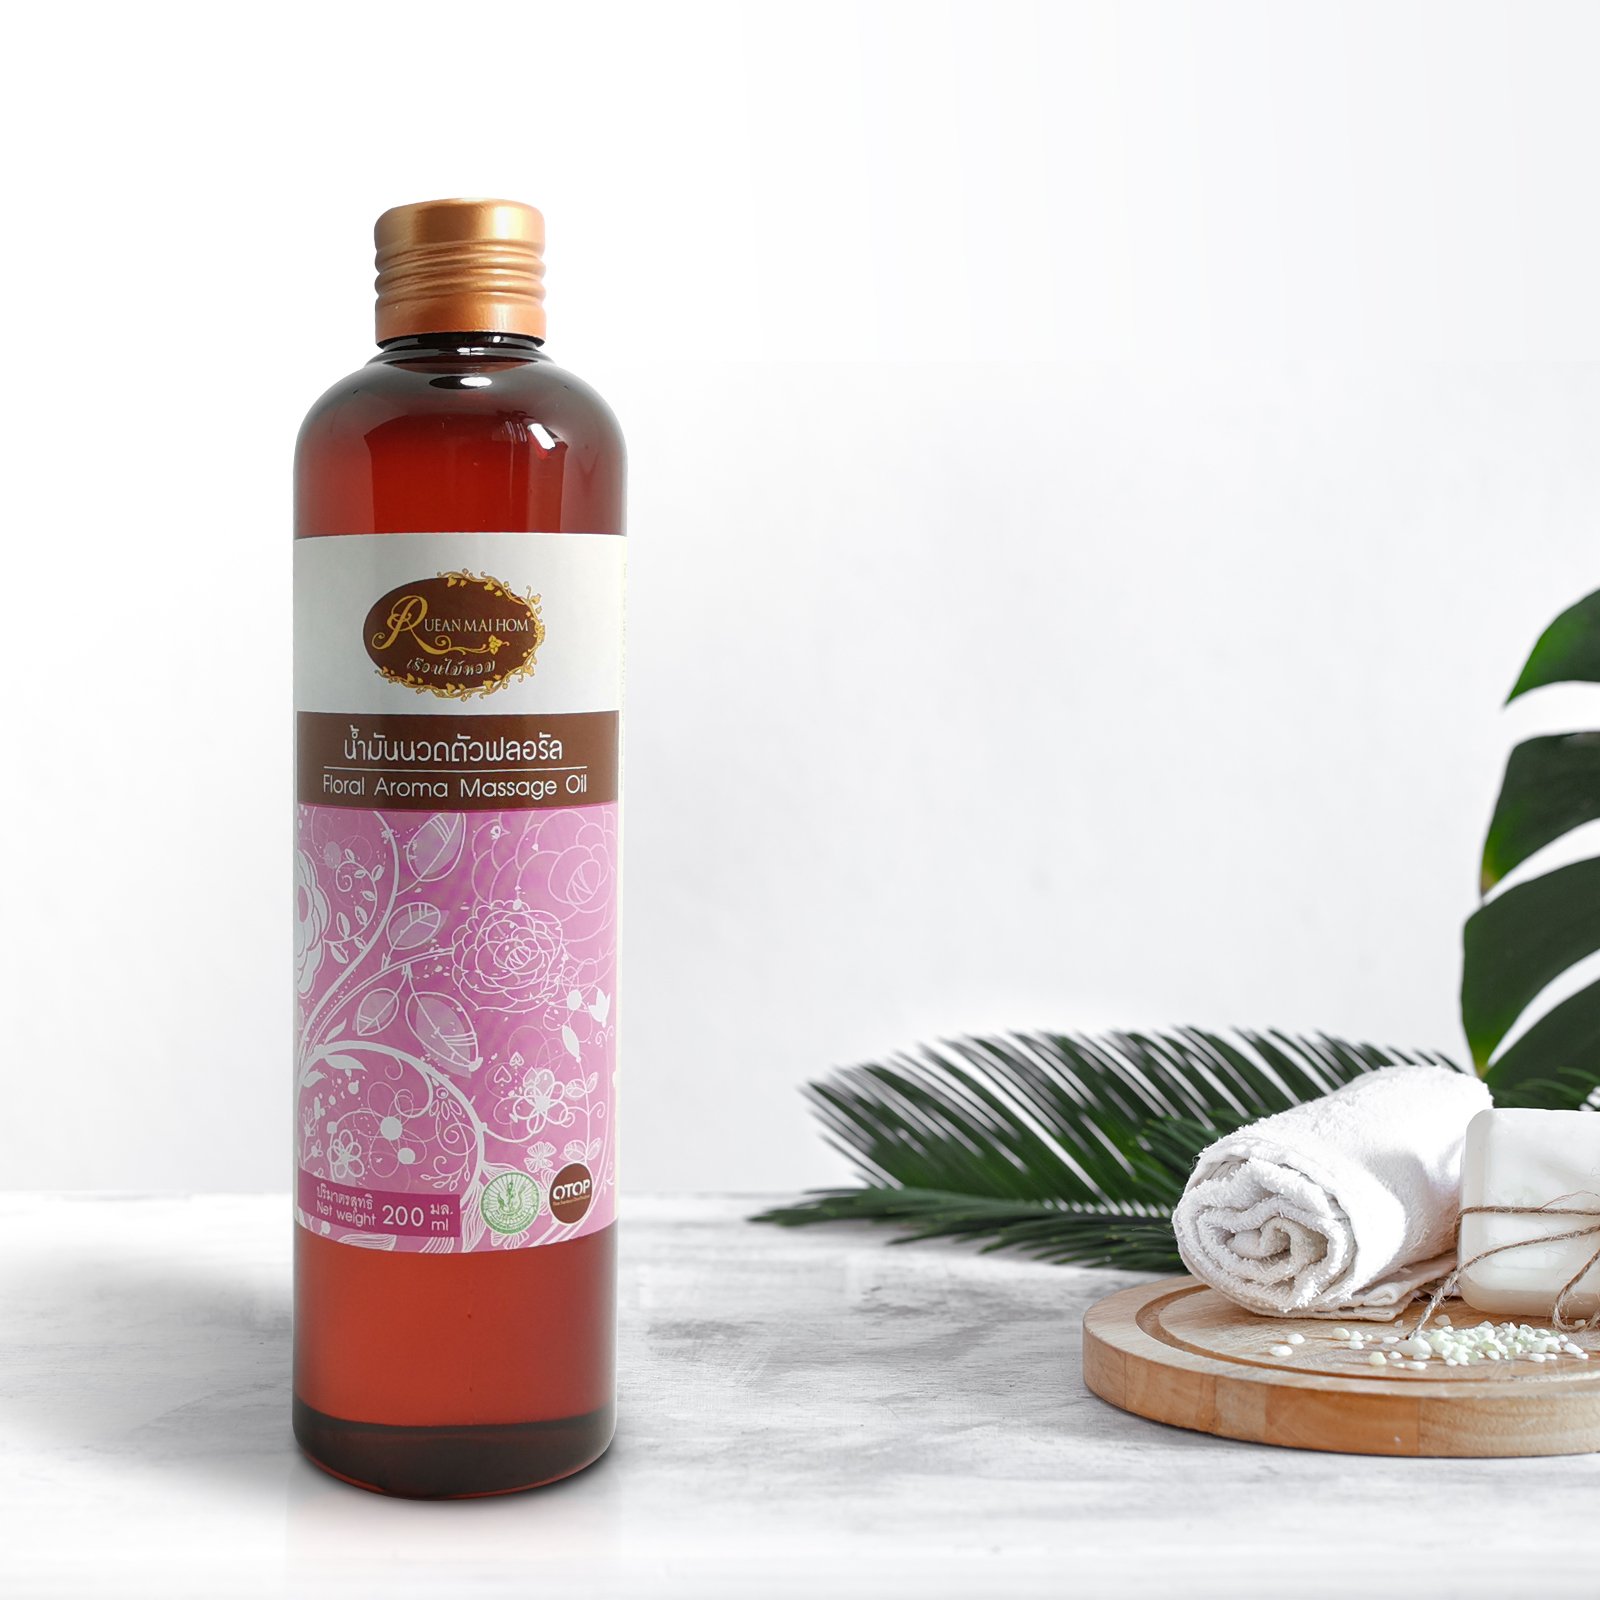 Floral Aroma Body Massage Oil Rueanmaihom